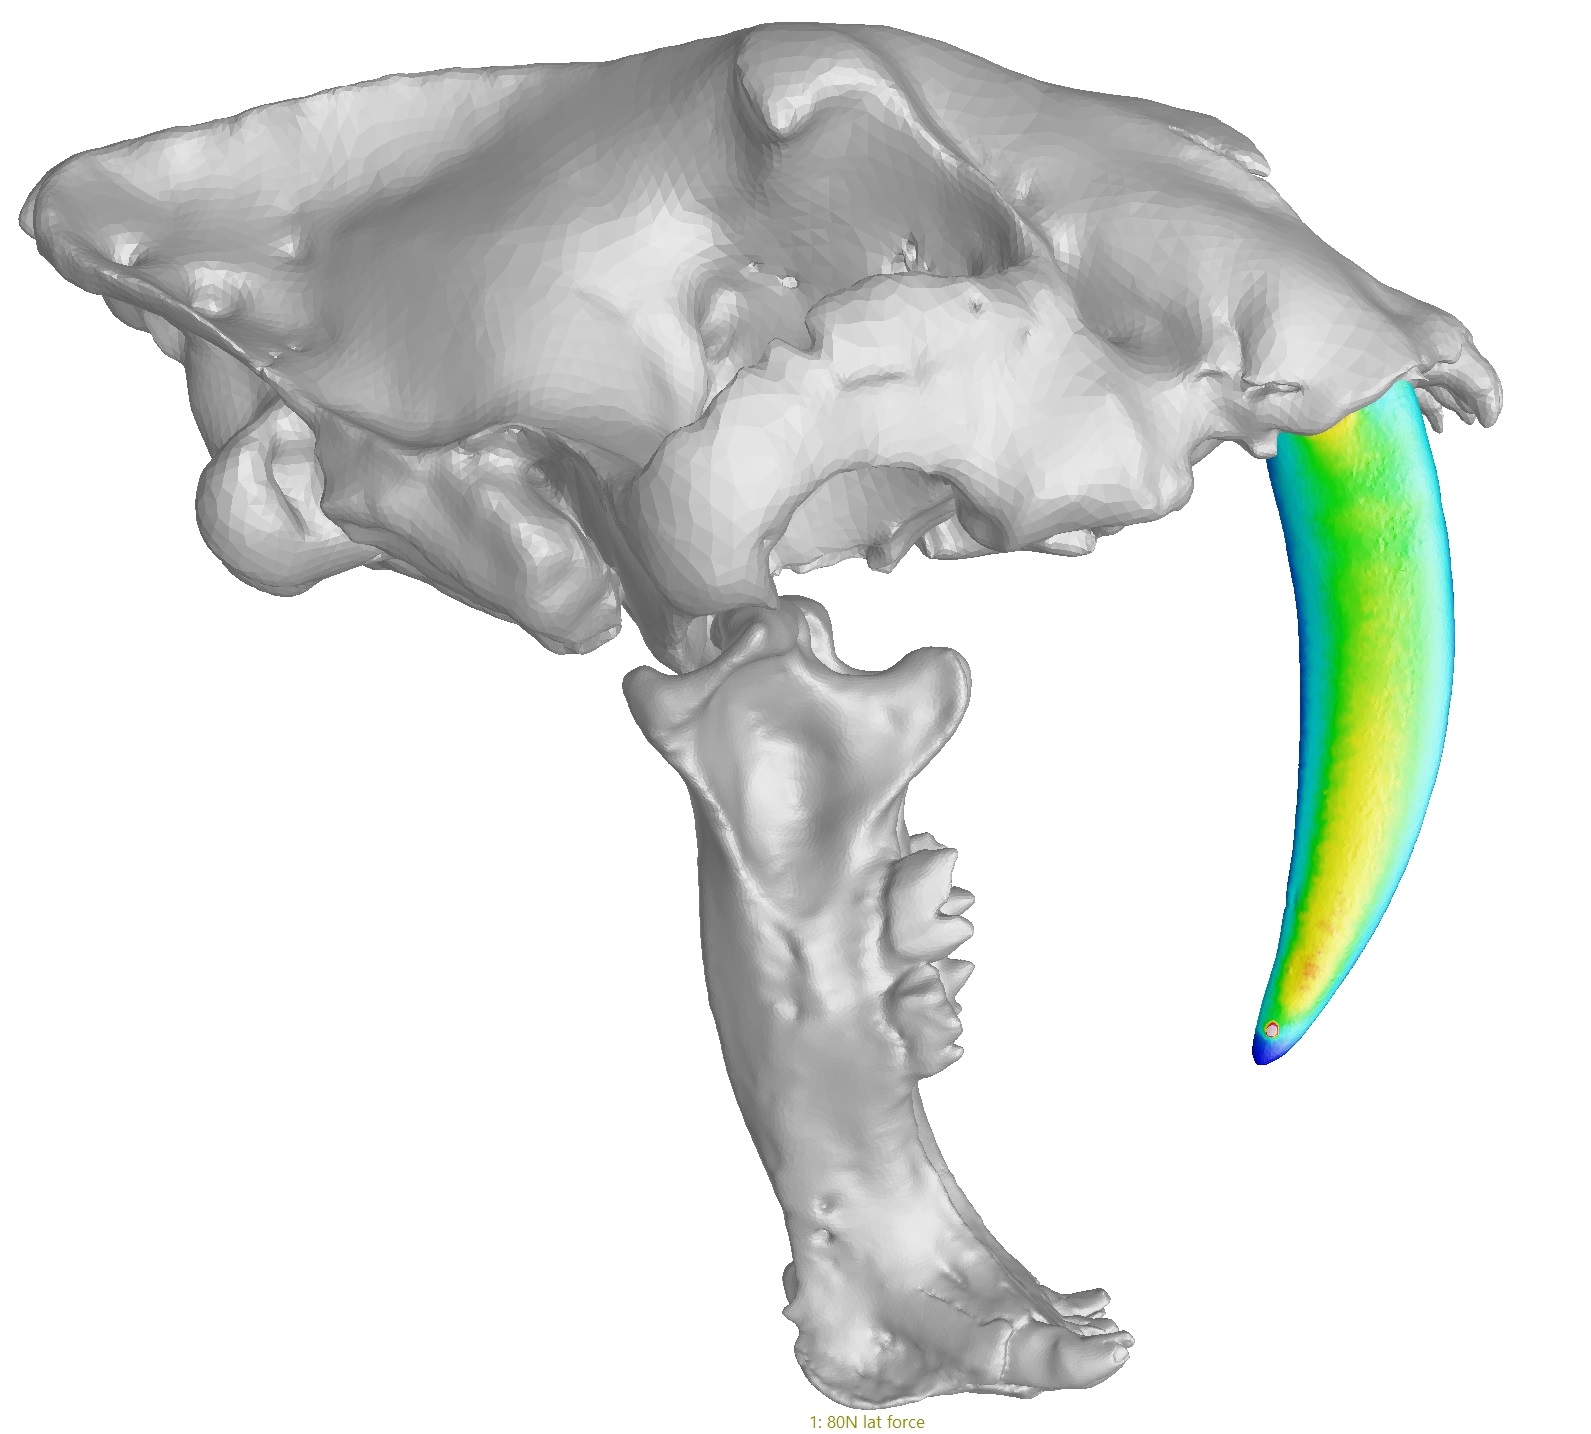 gray model of sabertooth skull with saber tooth colored green and yellow to indicate stress points